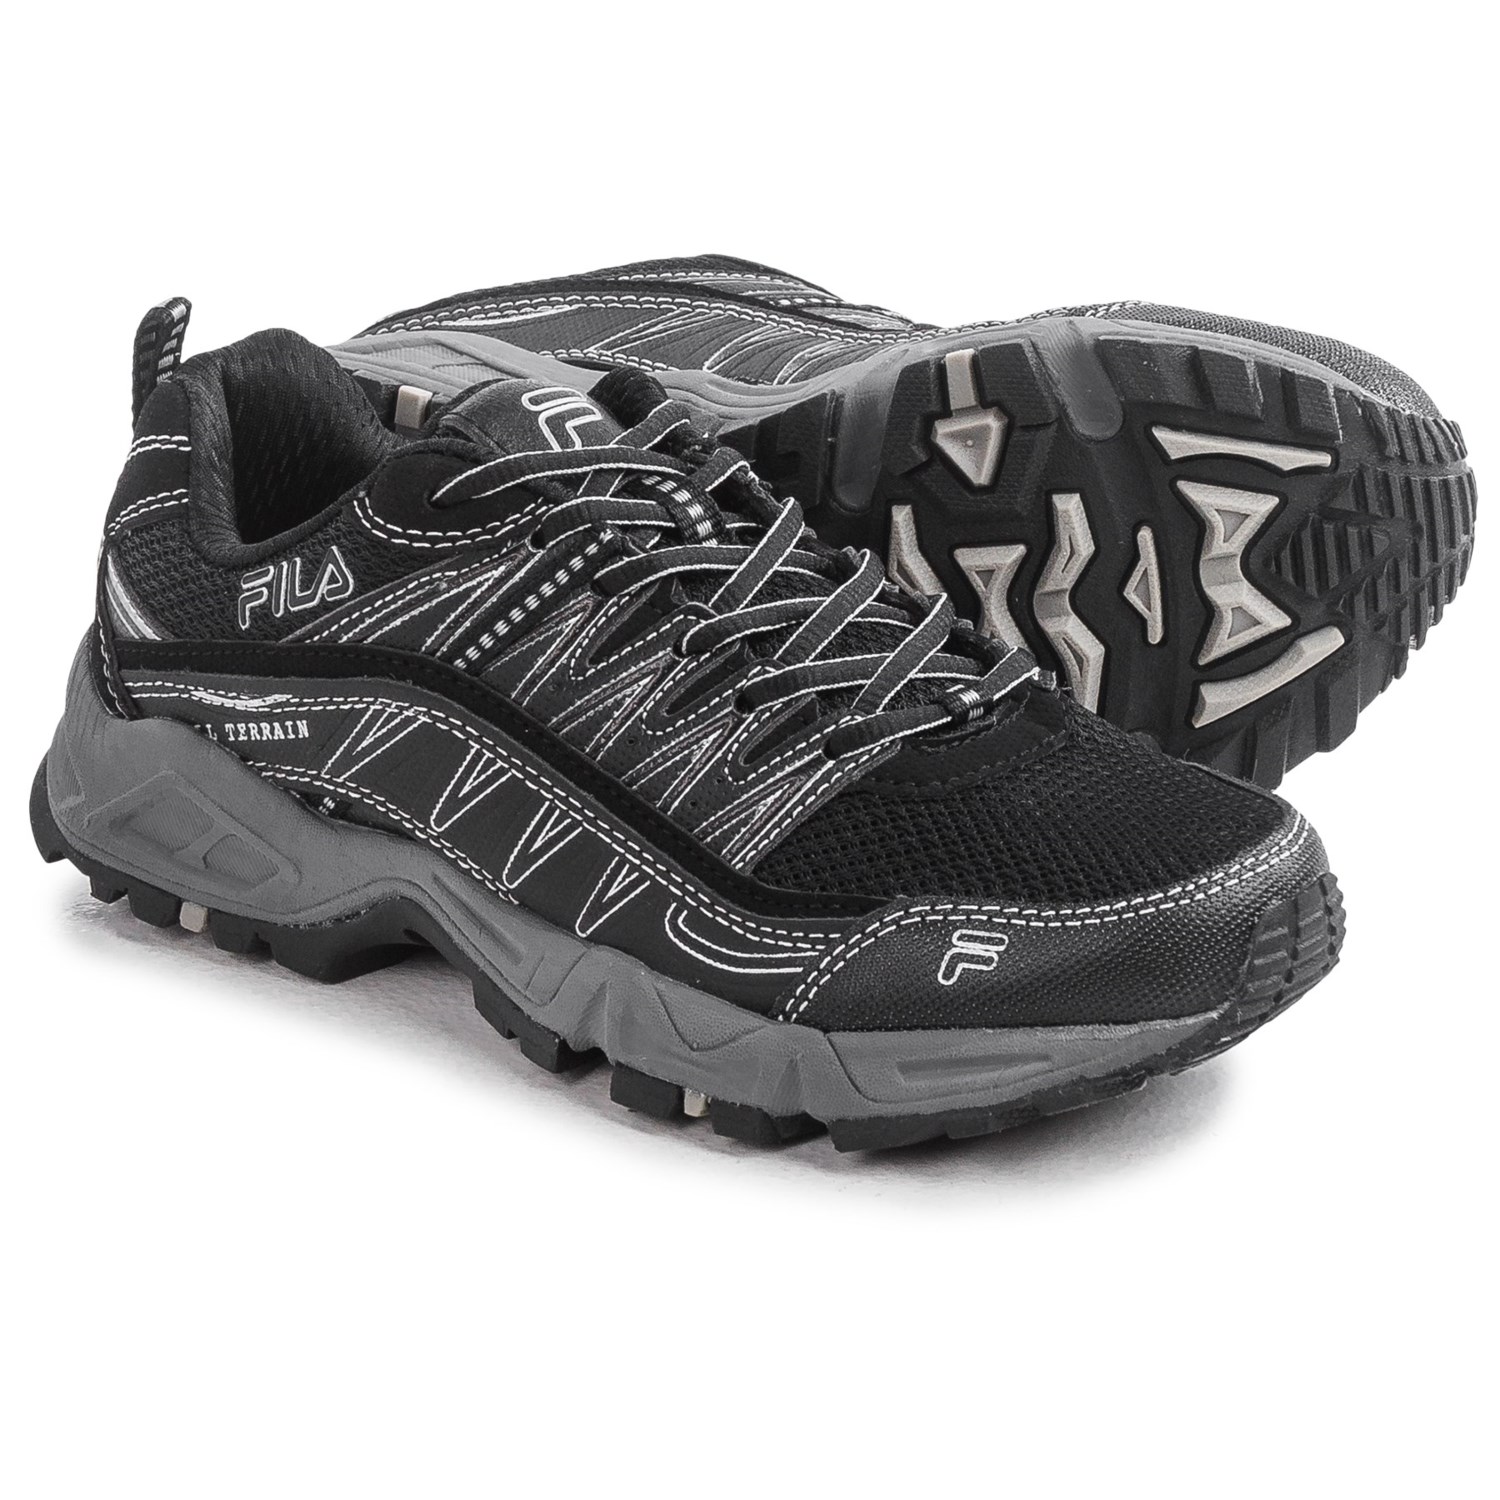 Fila AT Peake Trail Running Shoes (For 